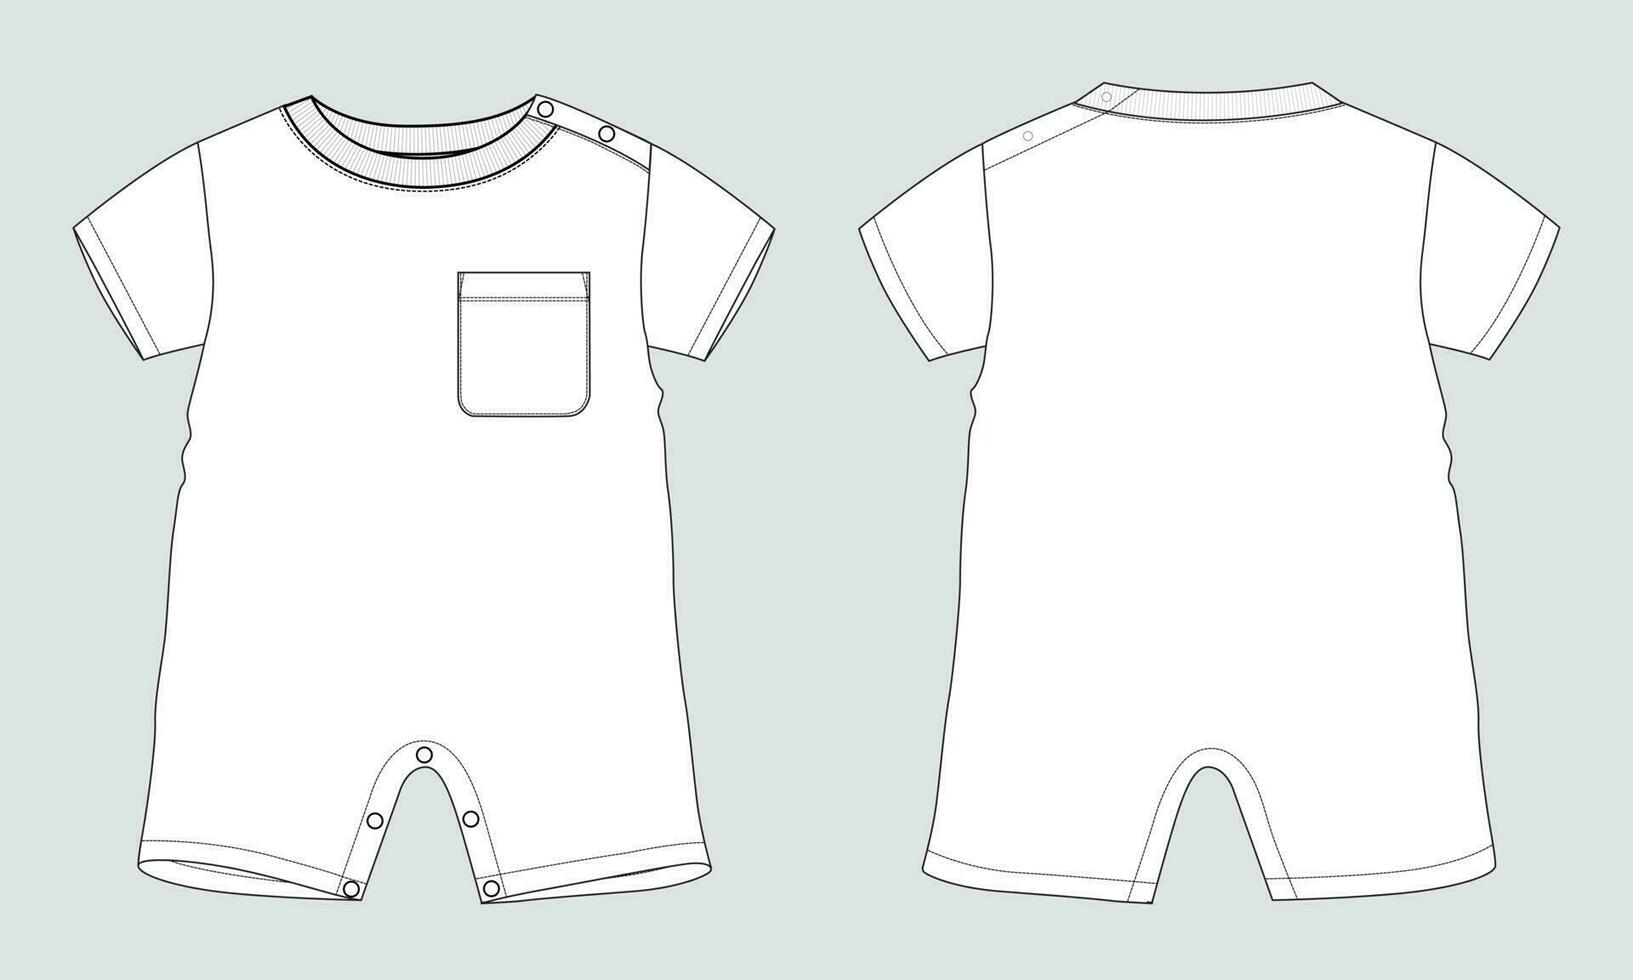 Romper bodysuit technical fashion flat sketch drawing vector illustration template for kids isolated on grey background